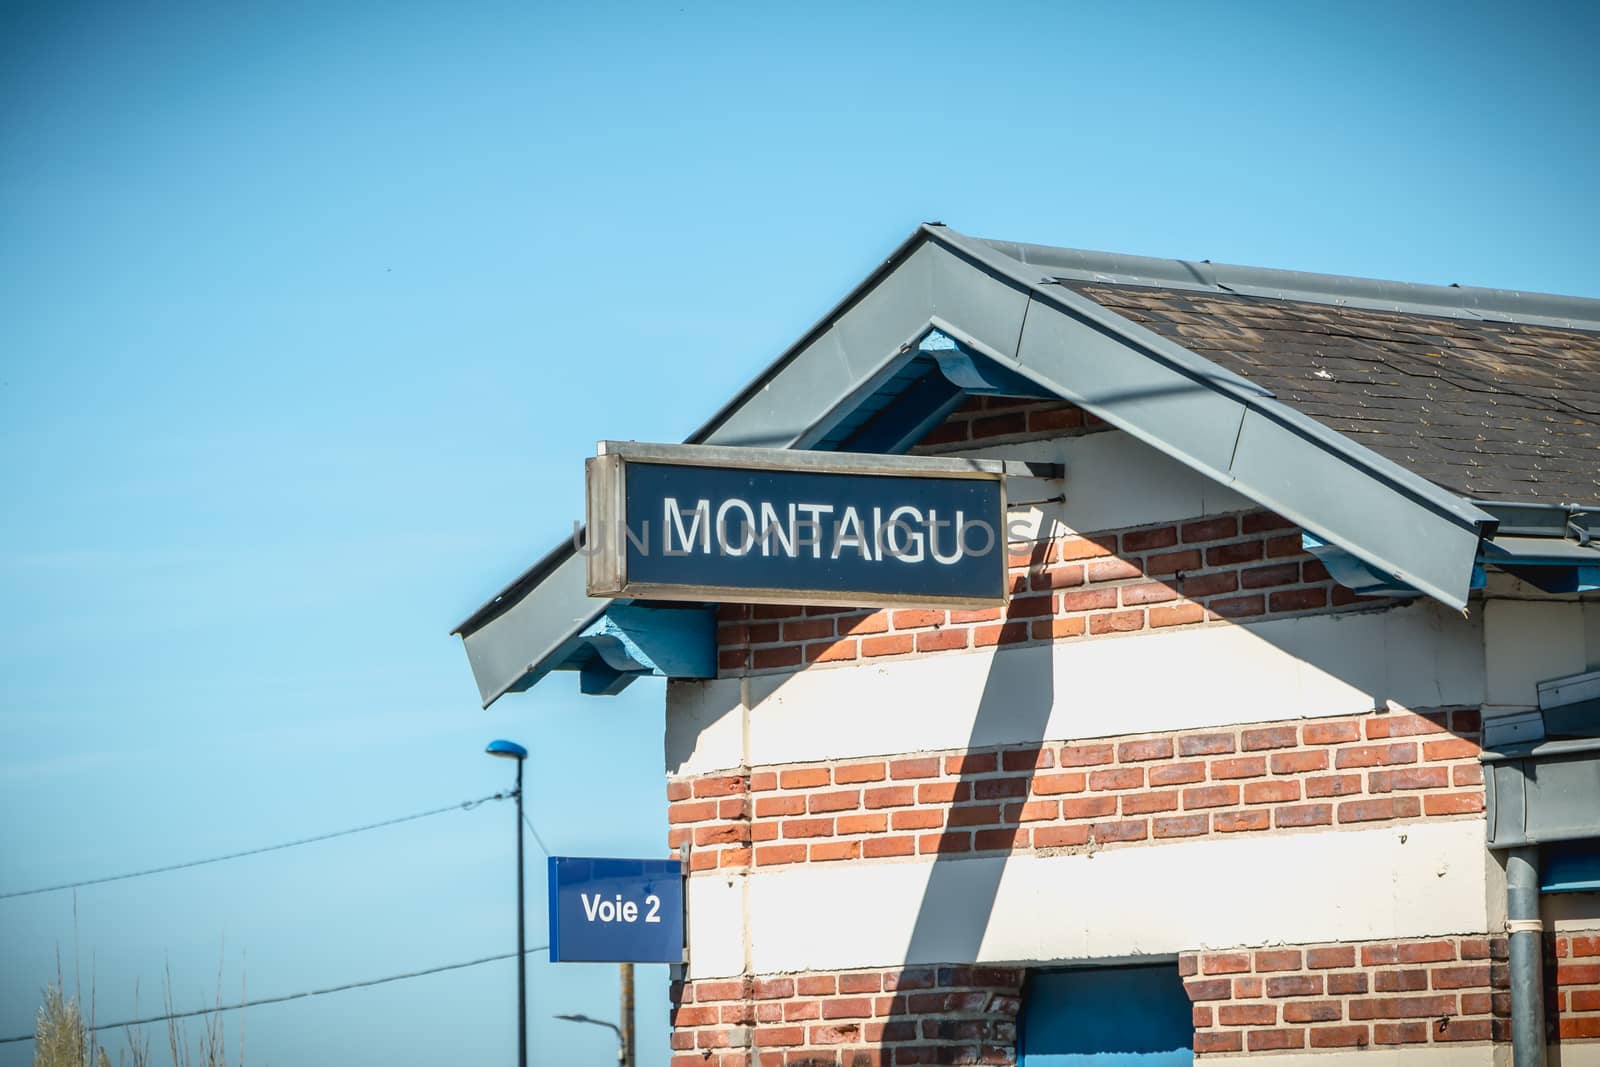 Architectural detail of the small Montaigu train station by AtlanticEUROSTOXX